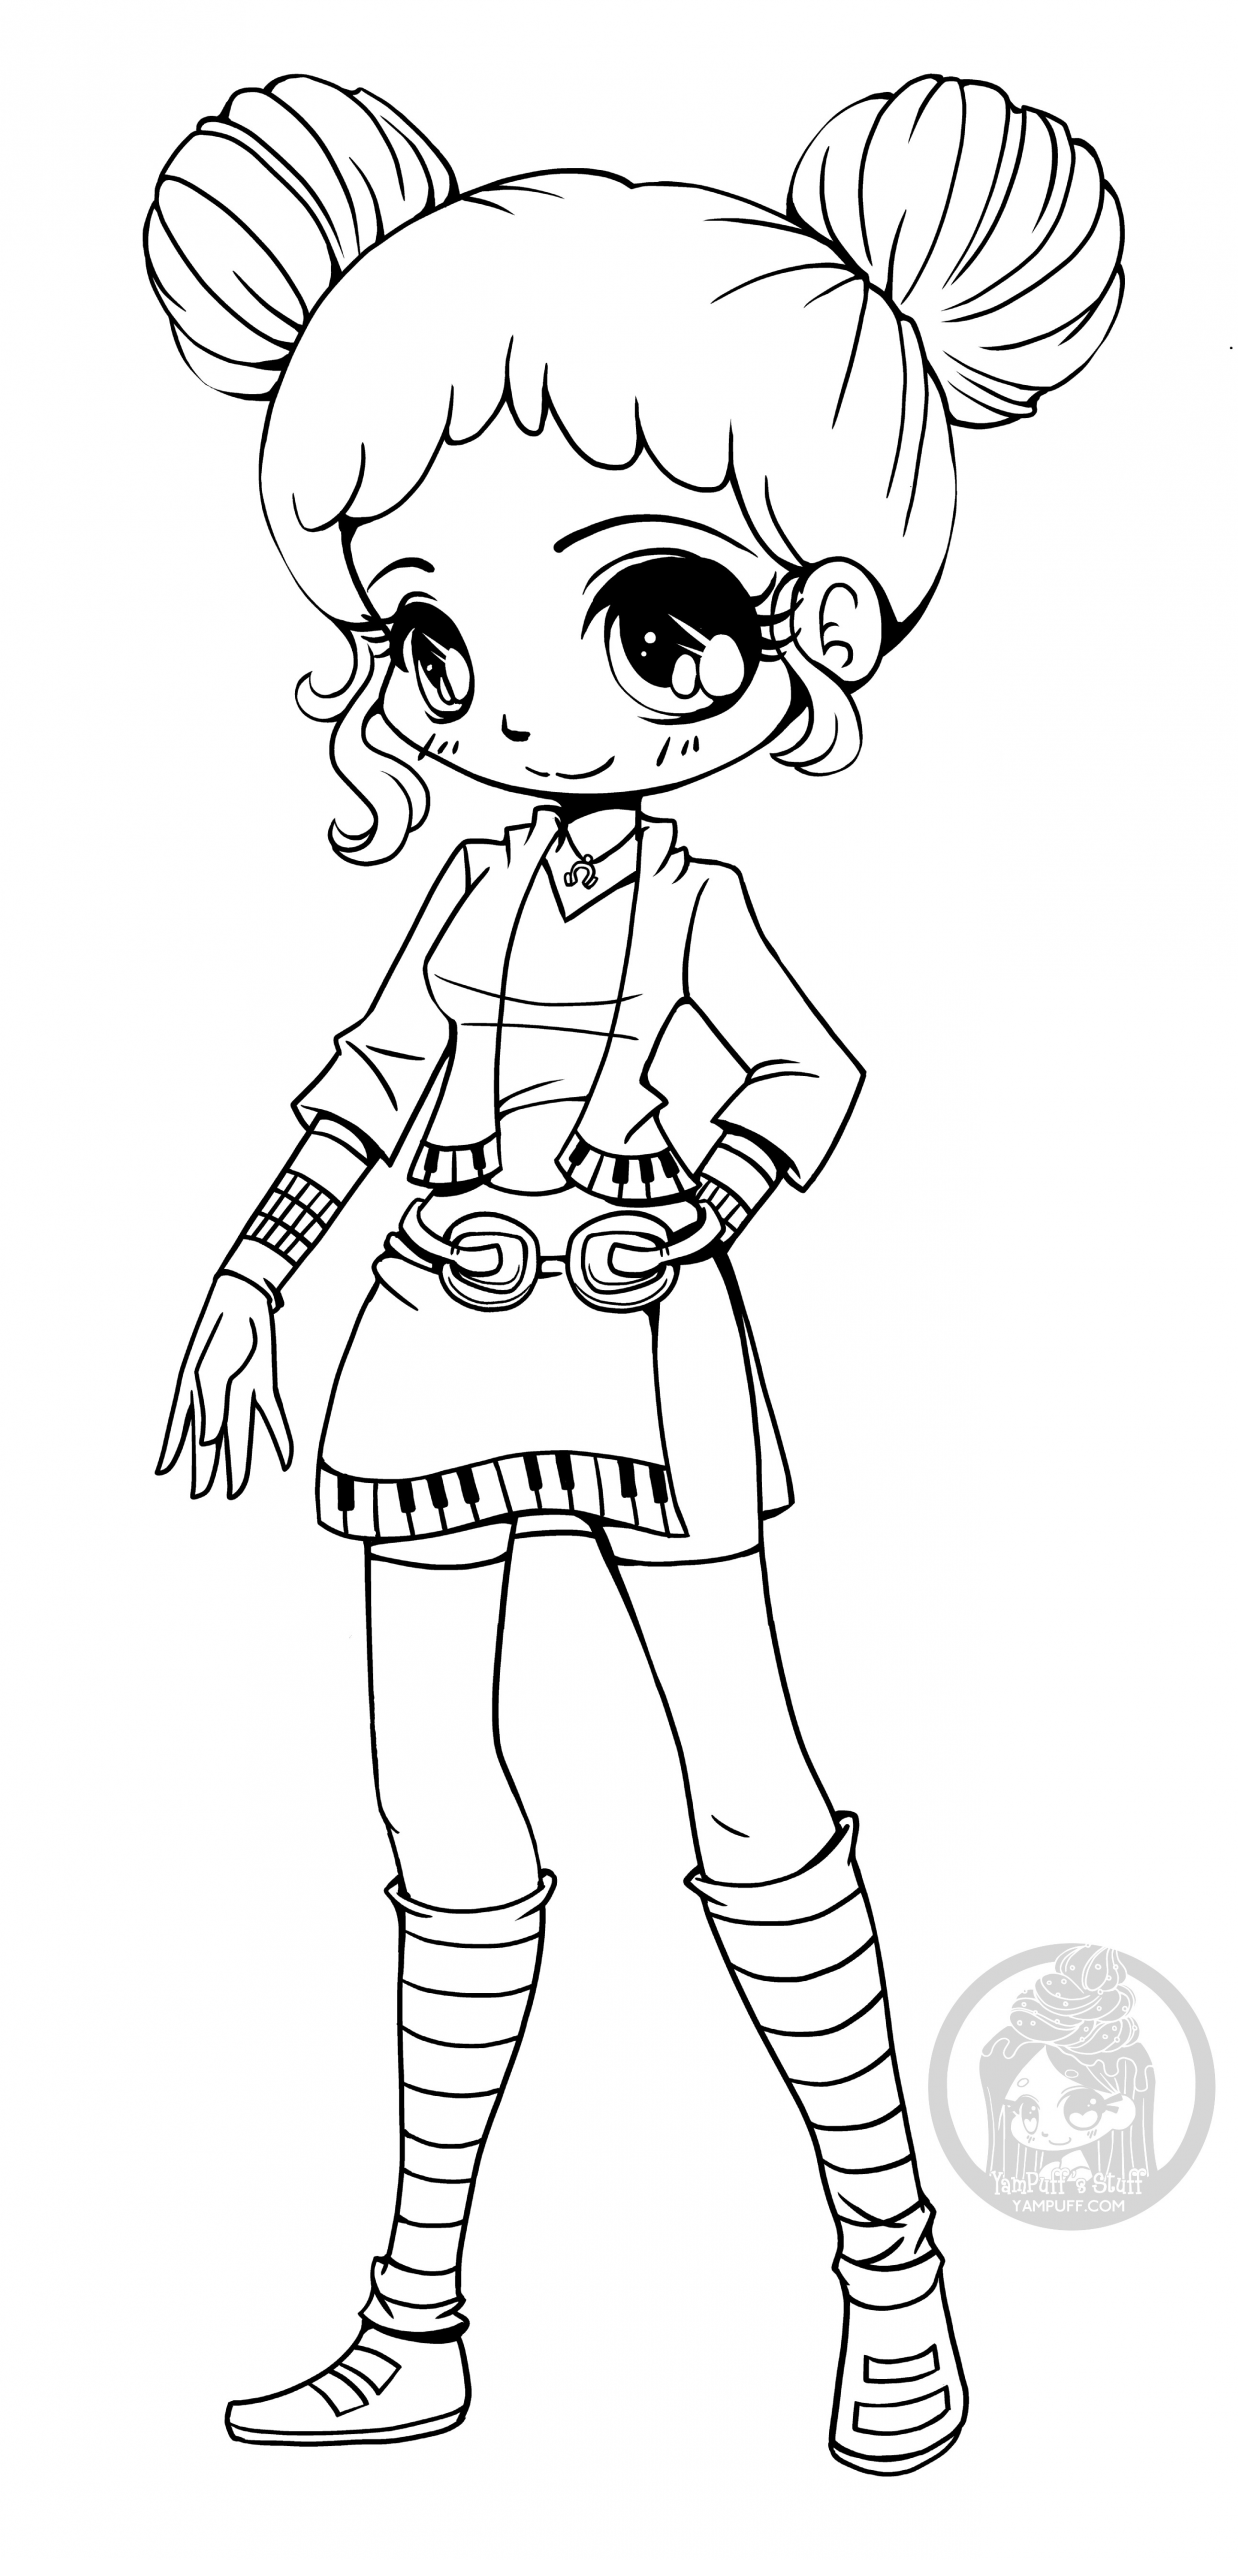 Kawaii Girls Coloring Pages
 Chibis Free Chibi Coloring Pages • YamPuff s Stuff